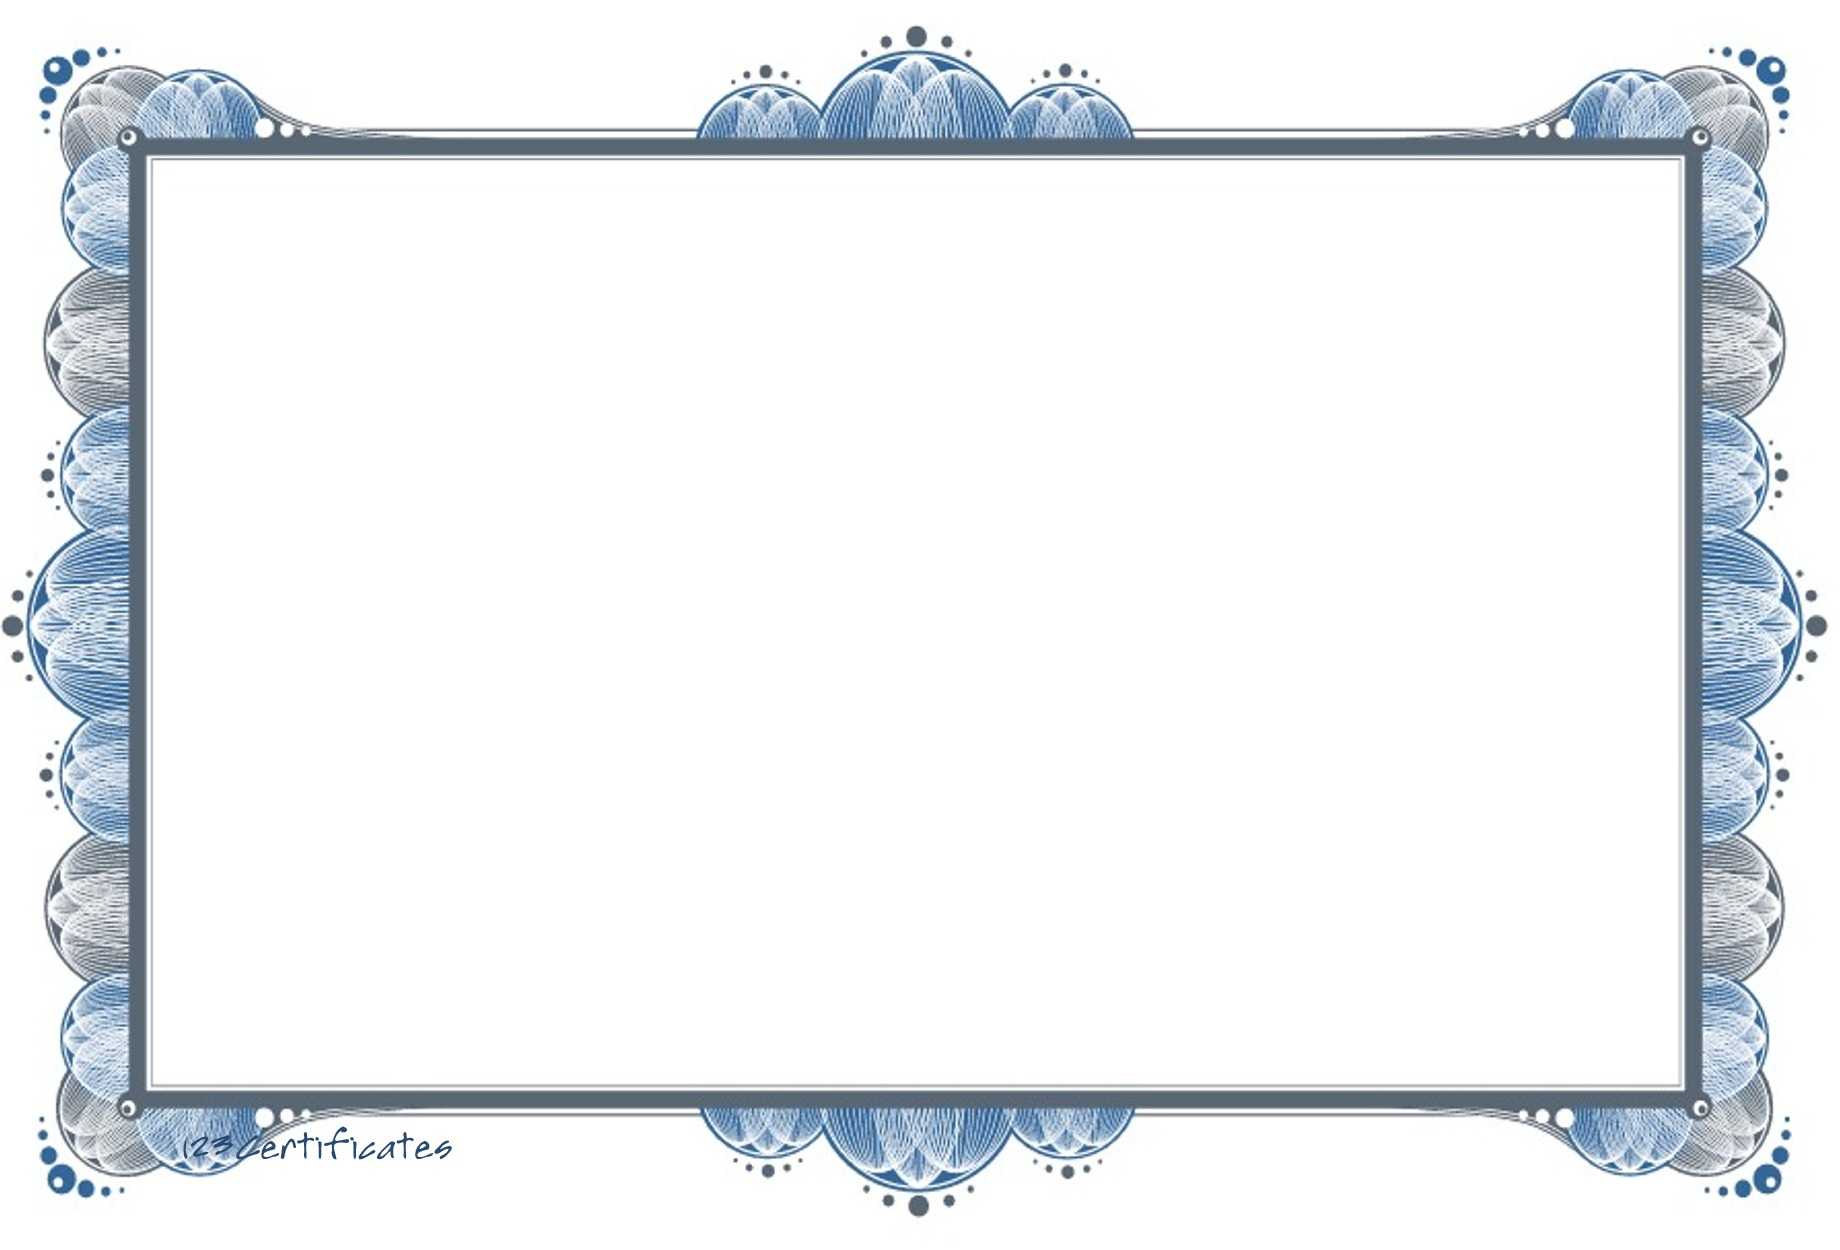 Free Certificate Border, Download Free Clip Art, Free Clip With Free Printable Certificate Border Templates